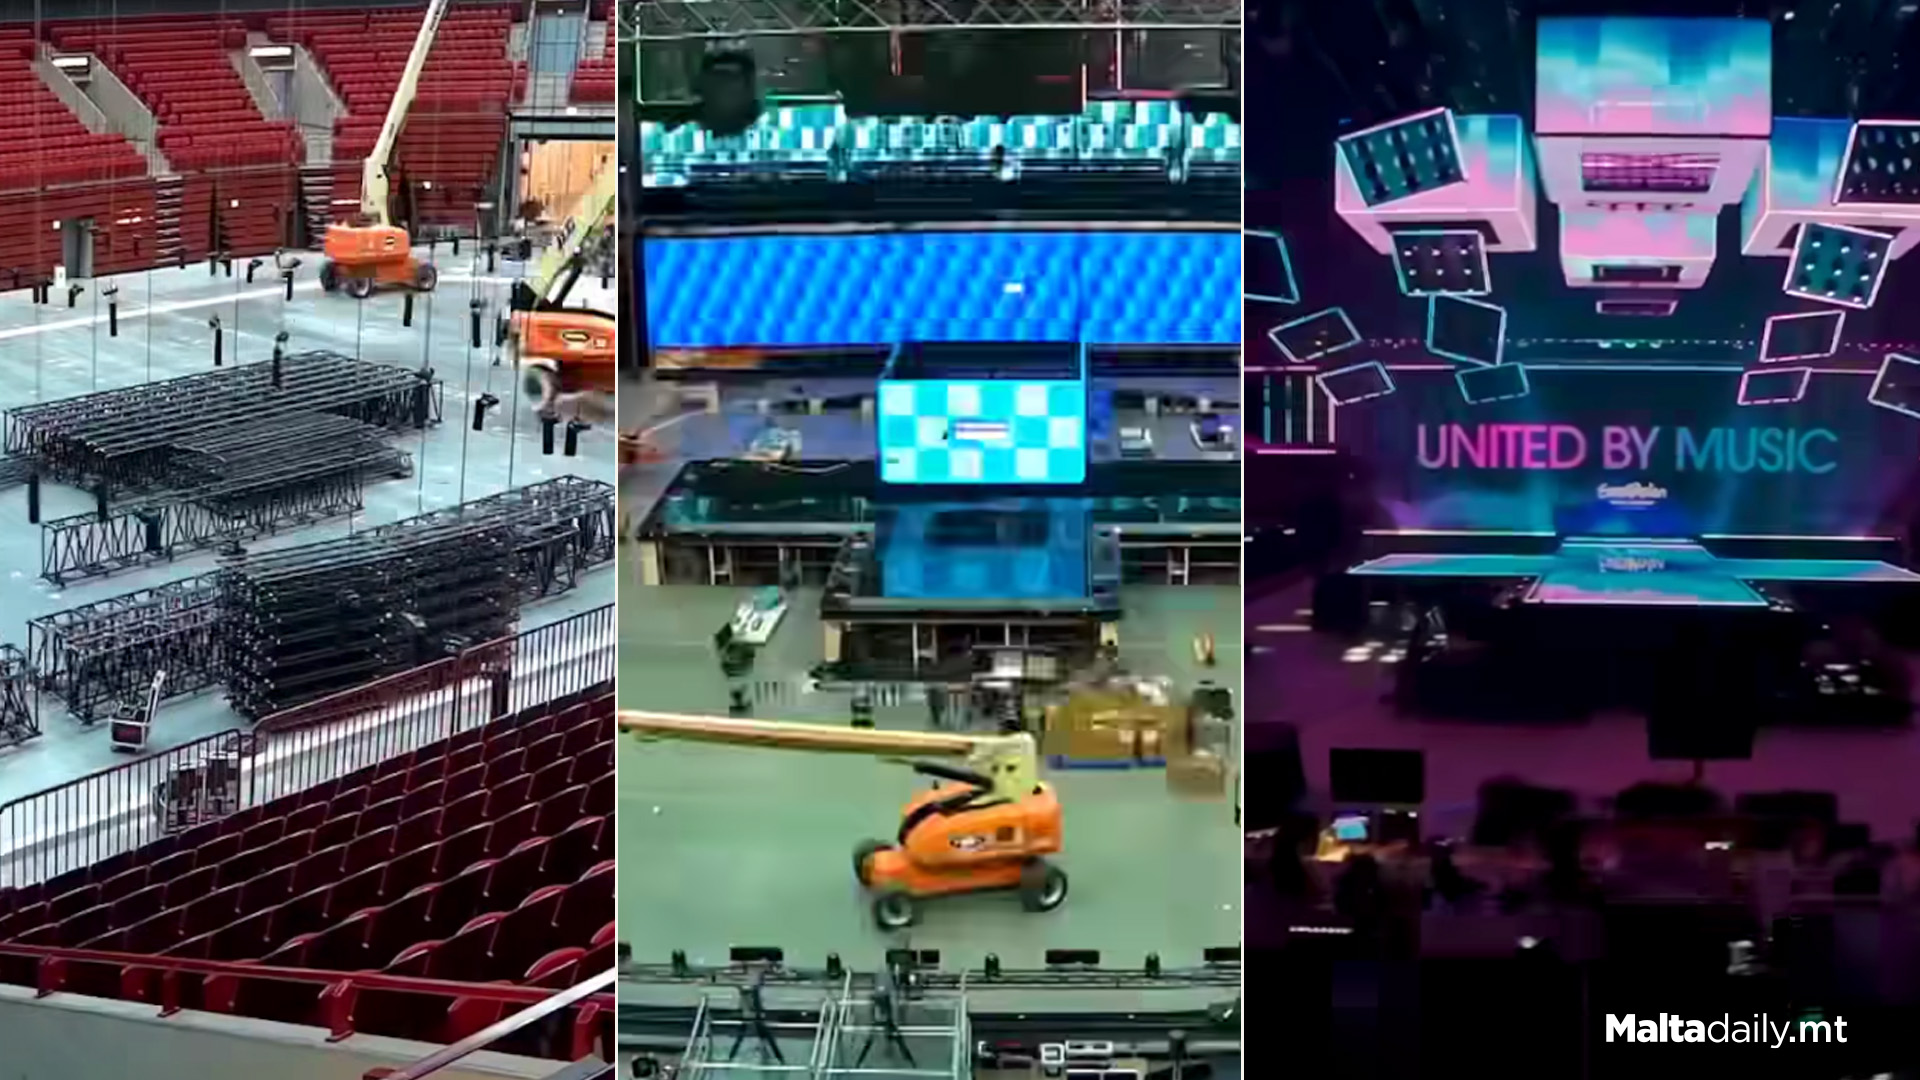 Watch The Eurovision Stage Get Set Up Ahead Of Contest